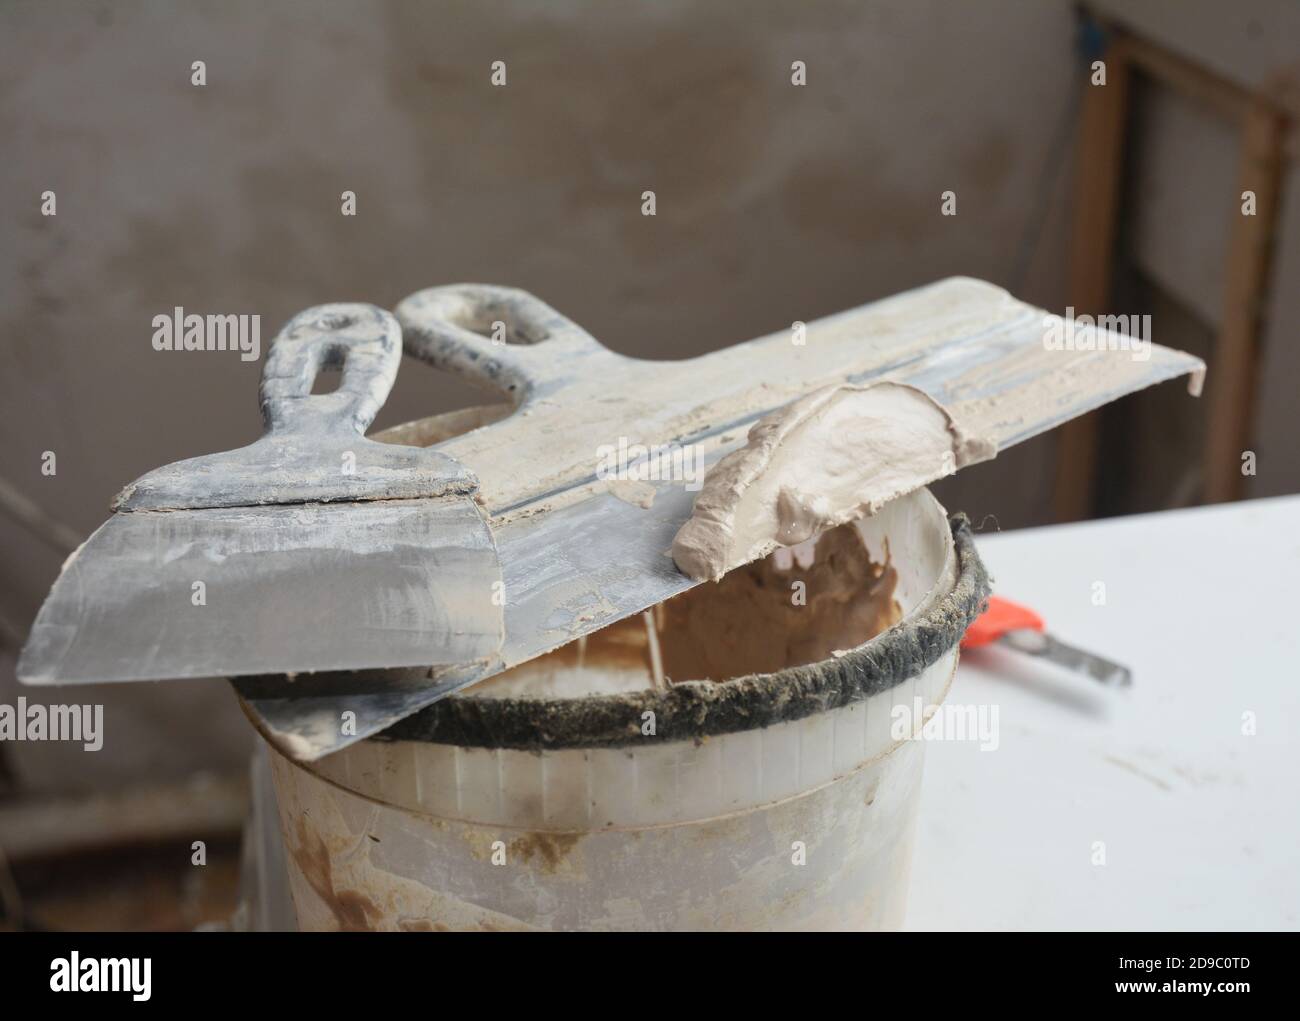 A close-up on two taping knives or joint knives, working tool of a builder used to spread joint compound, mud, final coats over drywalls. Stock Photo